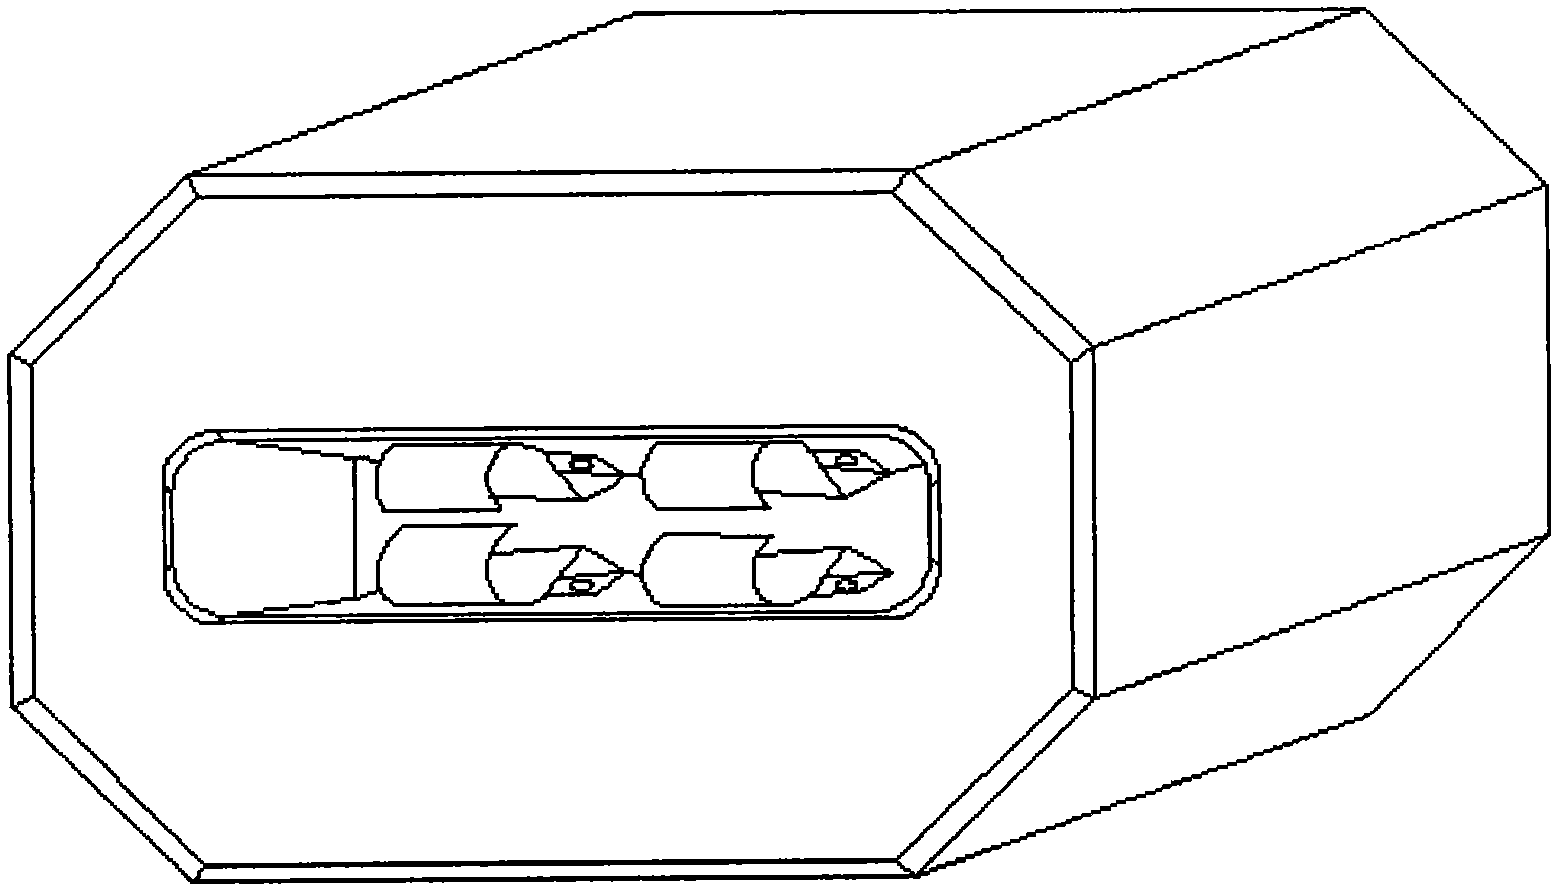 After-loading bridge-wire protective sleeve